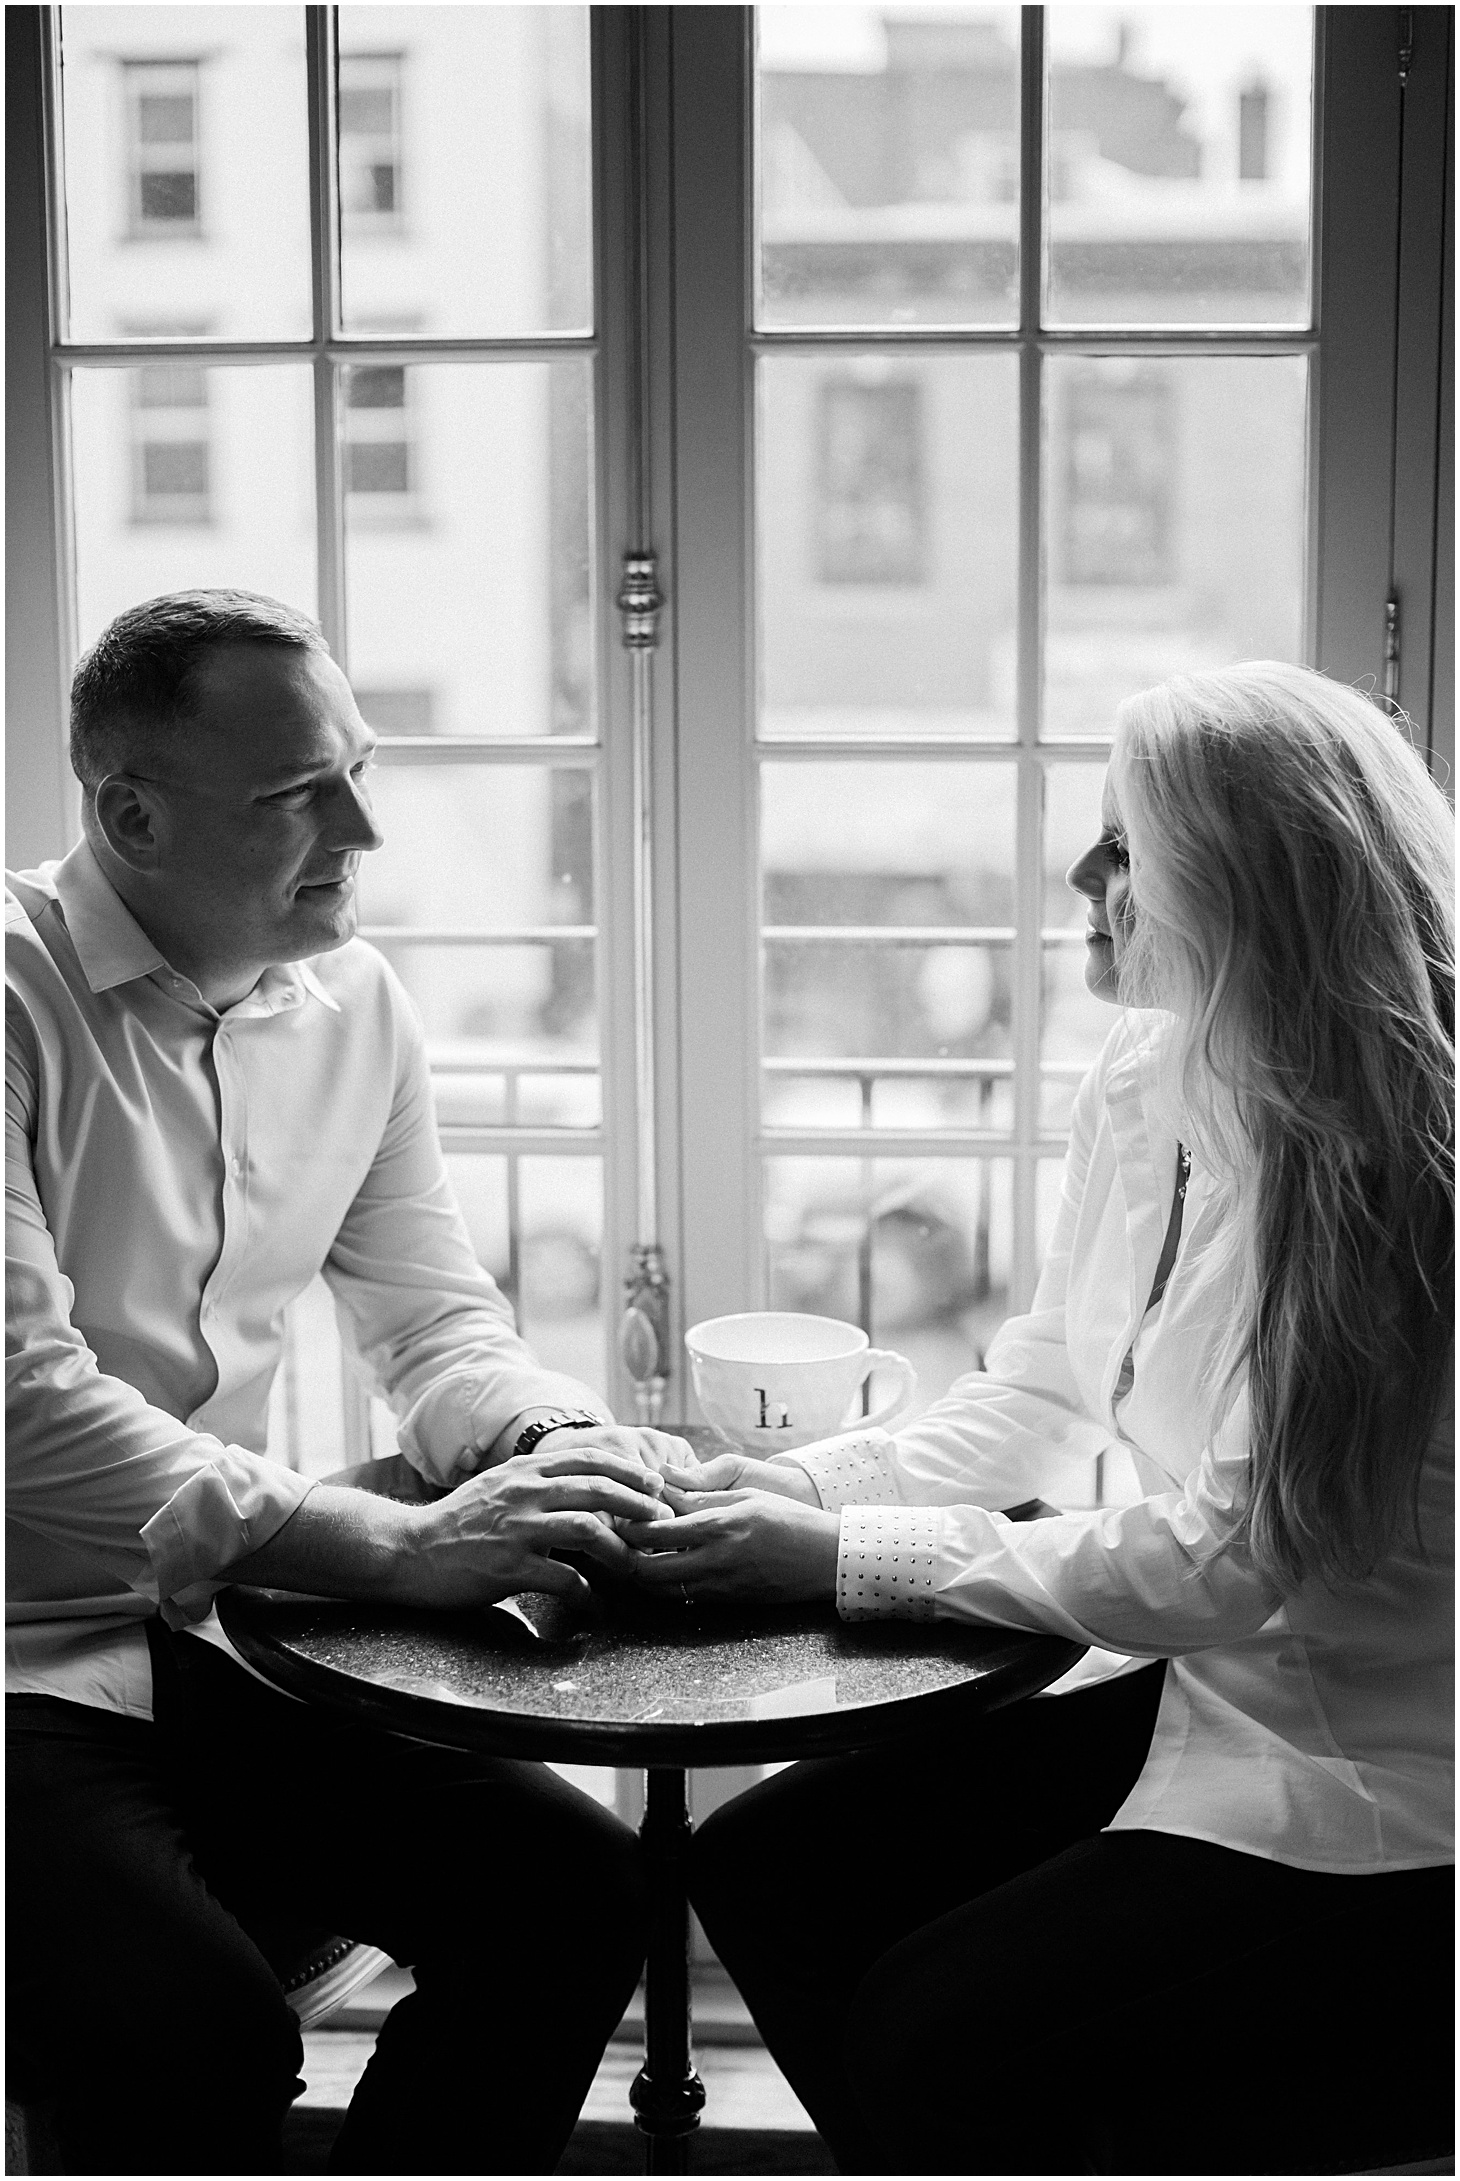 Creative DC Engagement Session Locations by Sarah Bradshaw Photography